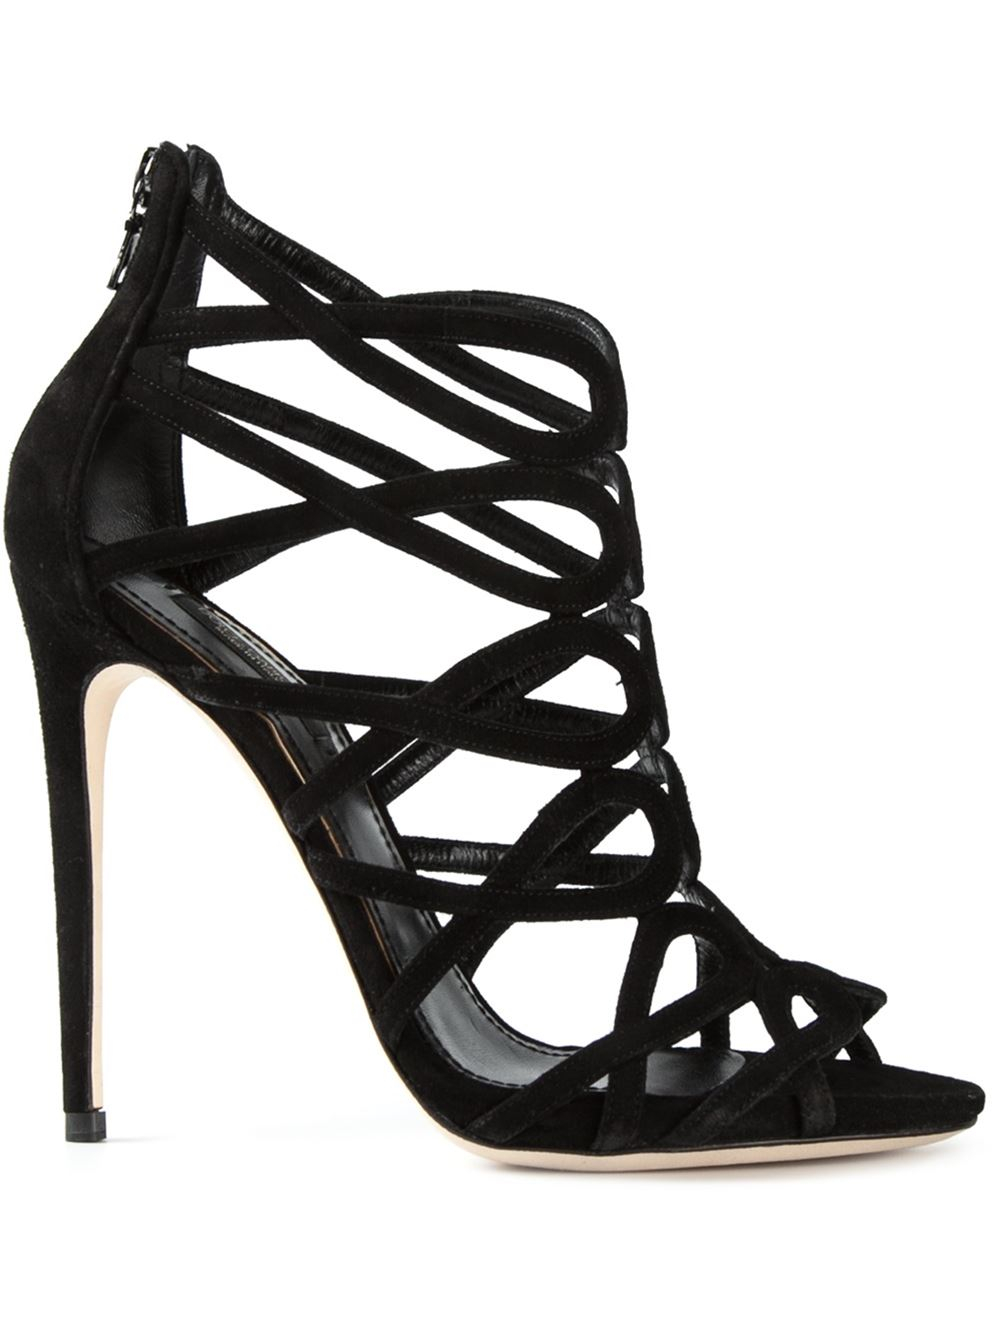 Dolce & gabbana Cut-out Strappy Sandals in Black | Lyst